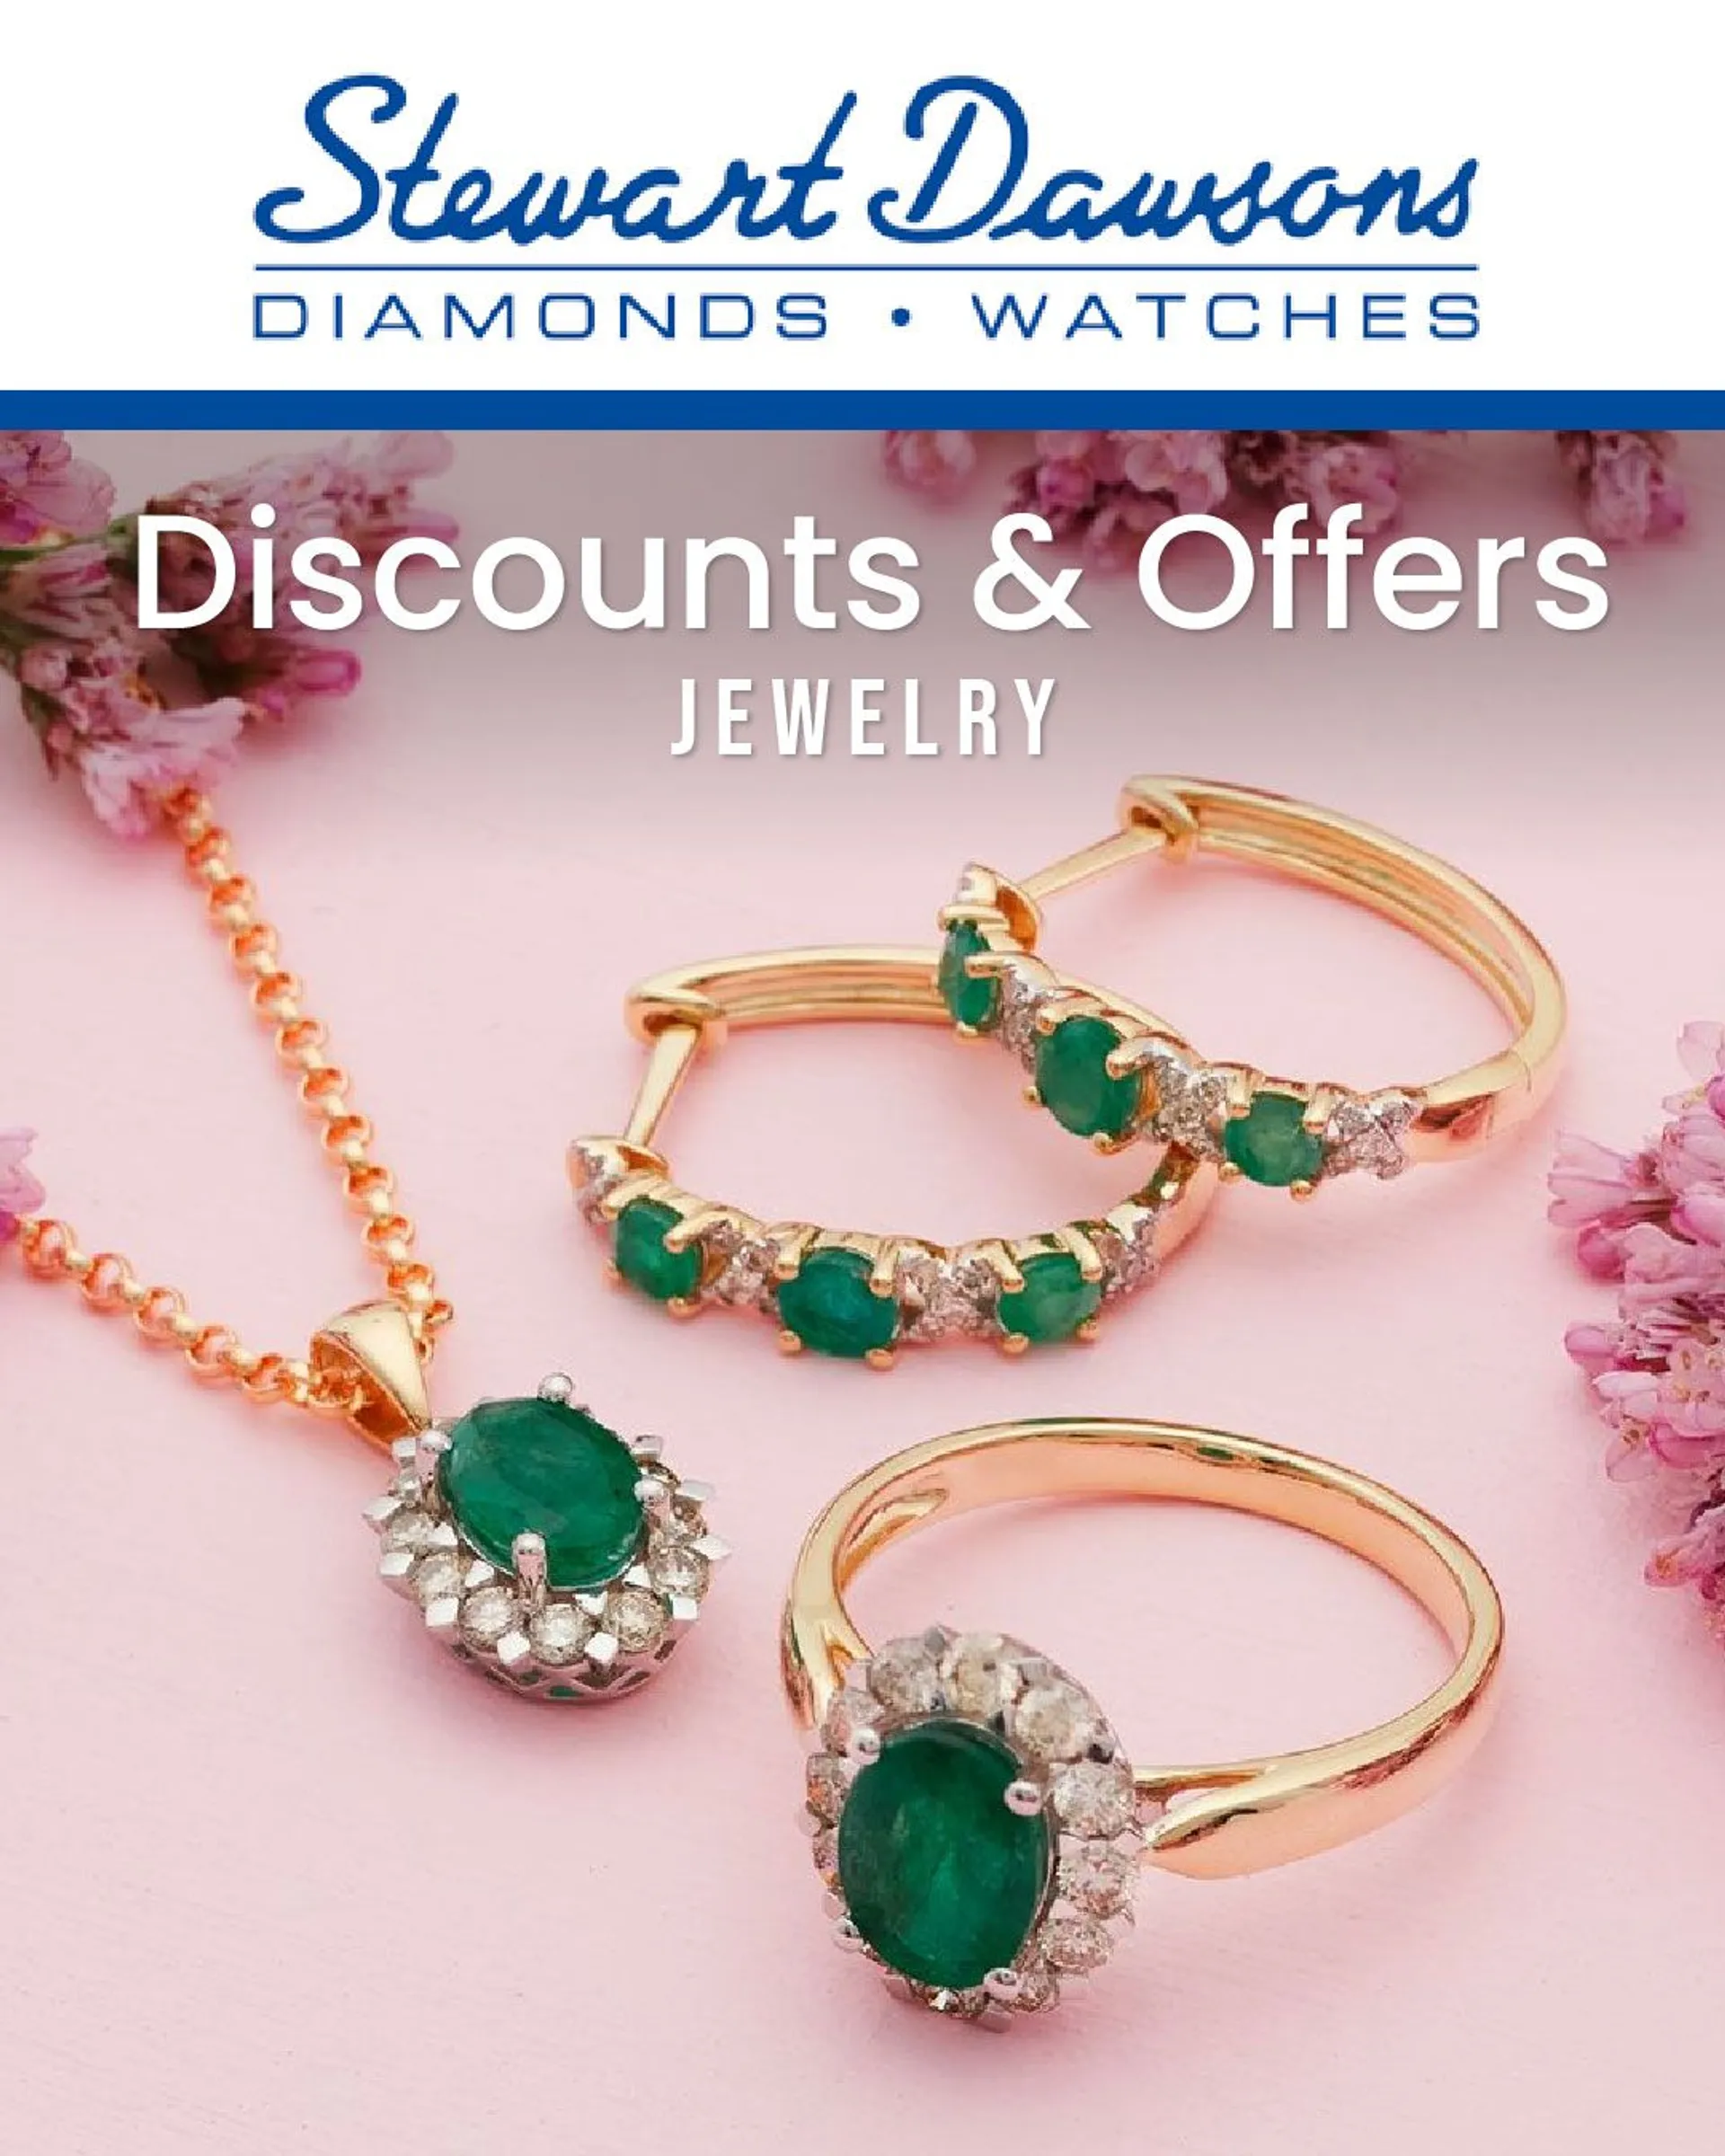 Stewart Dawsons - Jewellery and Watches - 18 April 23 April 2024 - Page 1